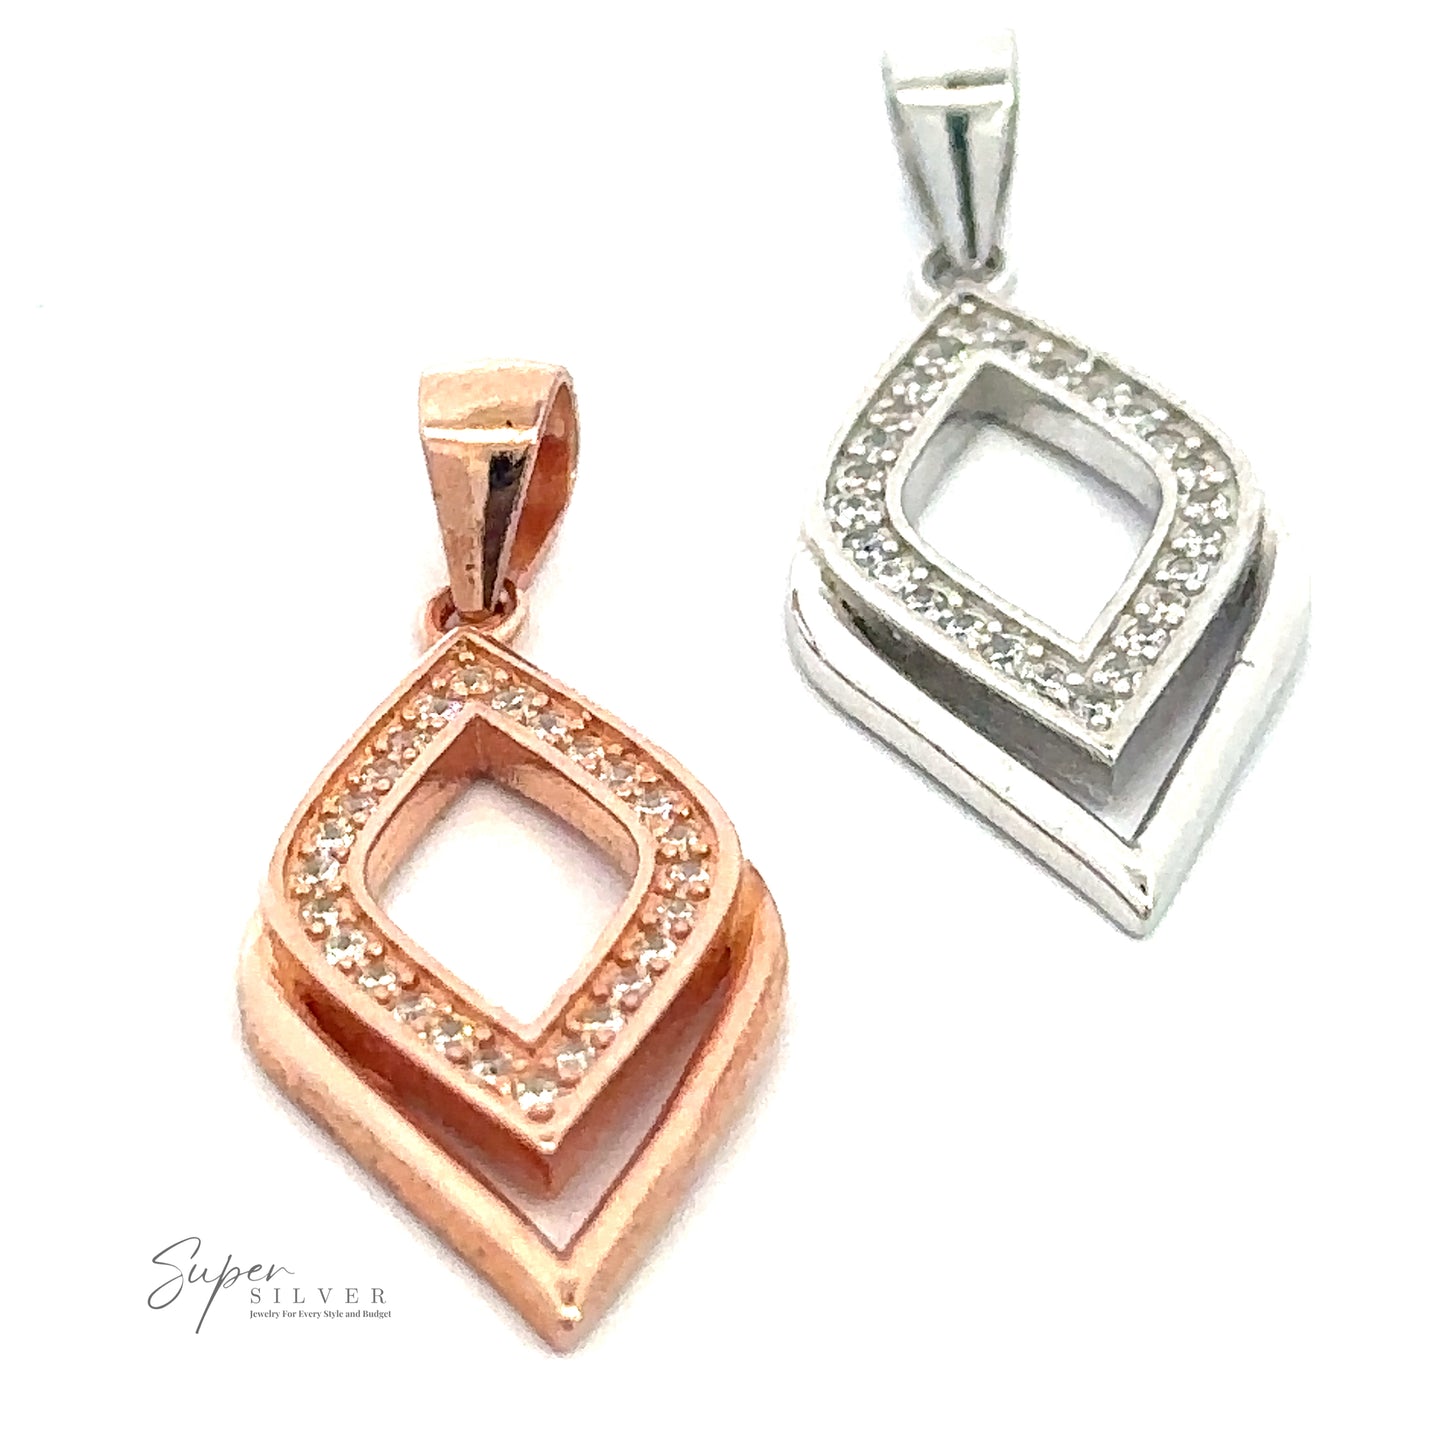 
                  
                    Two geometric, diamond-shaped pendants with inner diamond cutouts are shown. One is rose gold, and the other is sterling silver, both featuring small cubic zirconia crystals along the edges of the Cubic Zirconia Leaf Shape Pendant.
                  
                